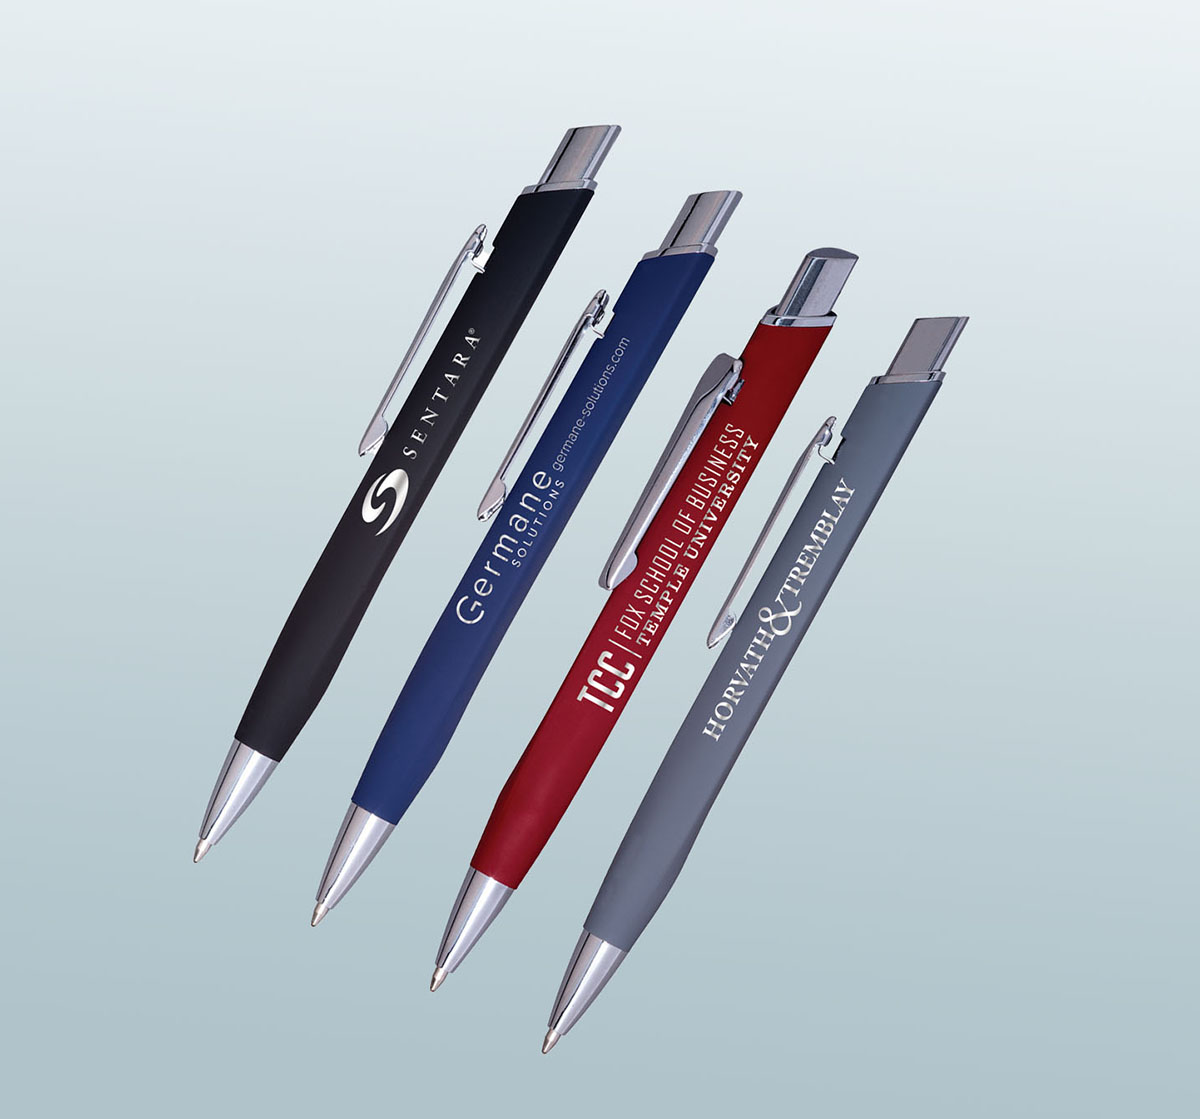 Examples of custom company pens branded with small business logos.